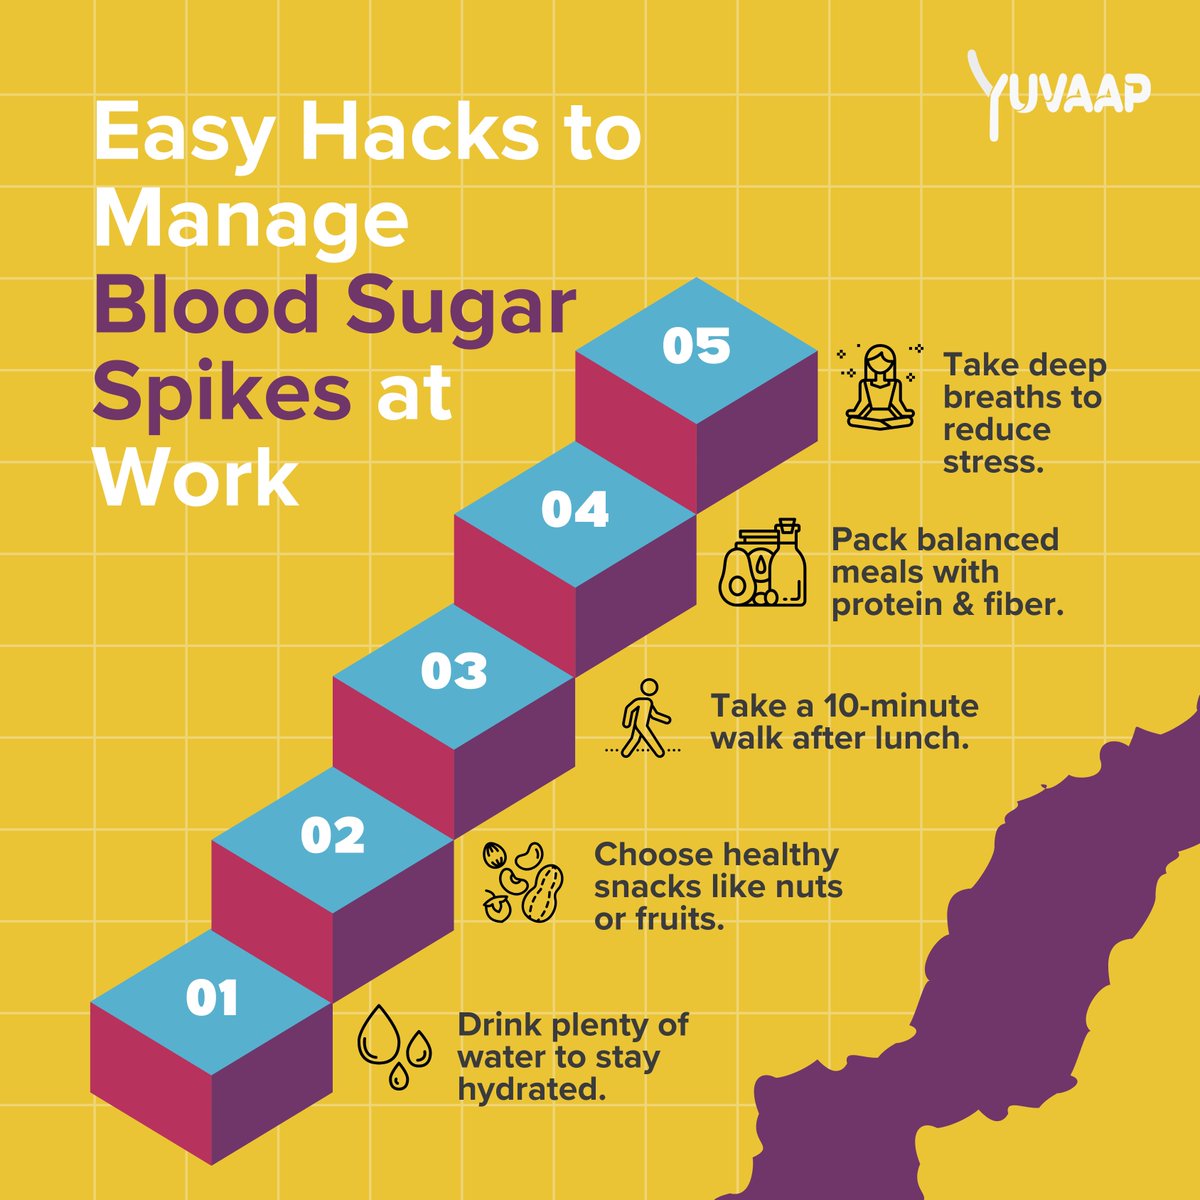 Boost your energy and stay productive at work by incorporating these simple hacks to balance your blood sugar levels. 

Take a quick 10-minute walk post-lunch and sneak in some calf raises for an added energy.

#EnergyBoost #ProductivityTips #BloodSugarControl #HealthyWorkplace